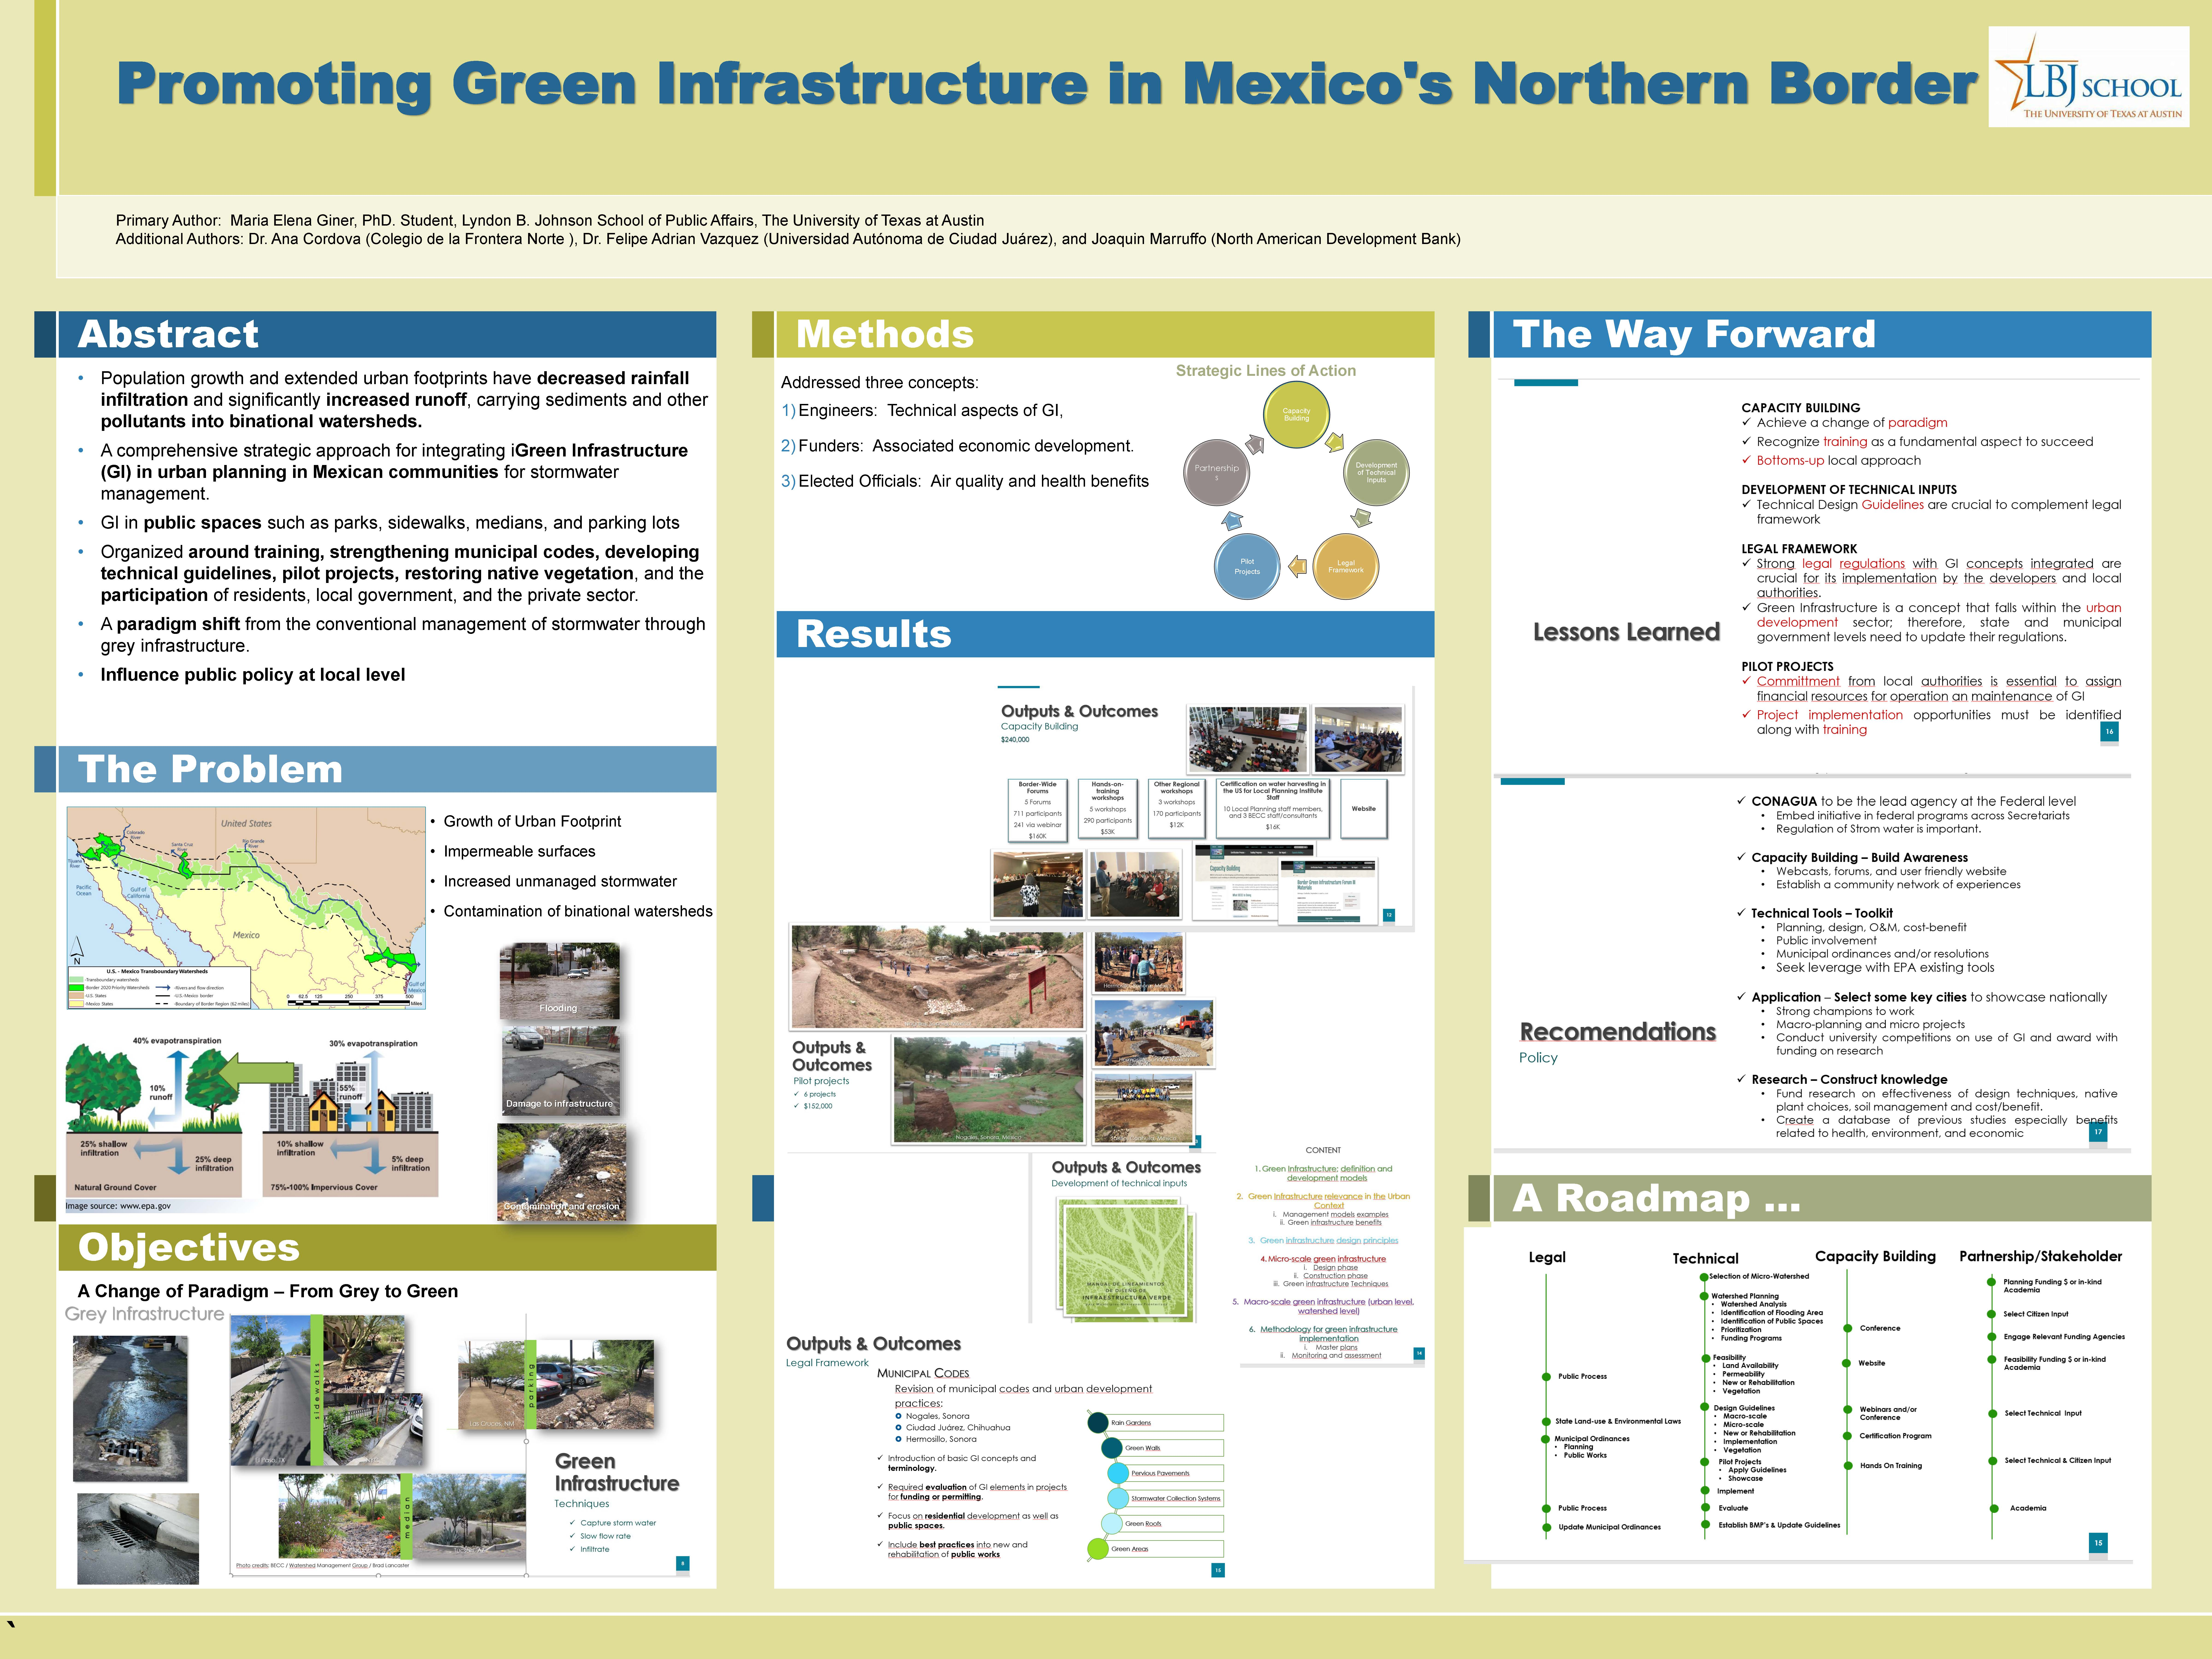 Innovation Bound 2019 research poster: Promoting Green Infrastructure in Mexico's Northern Border